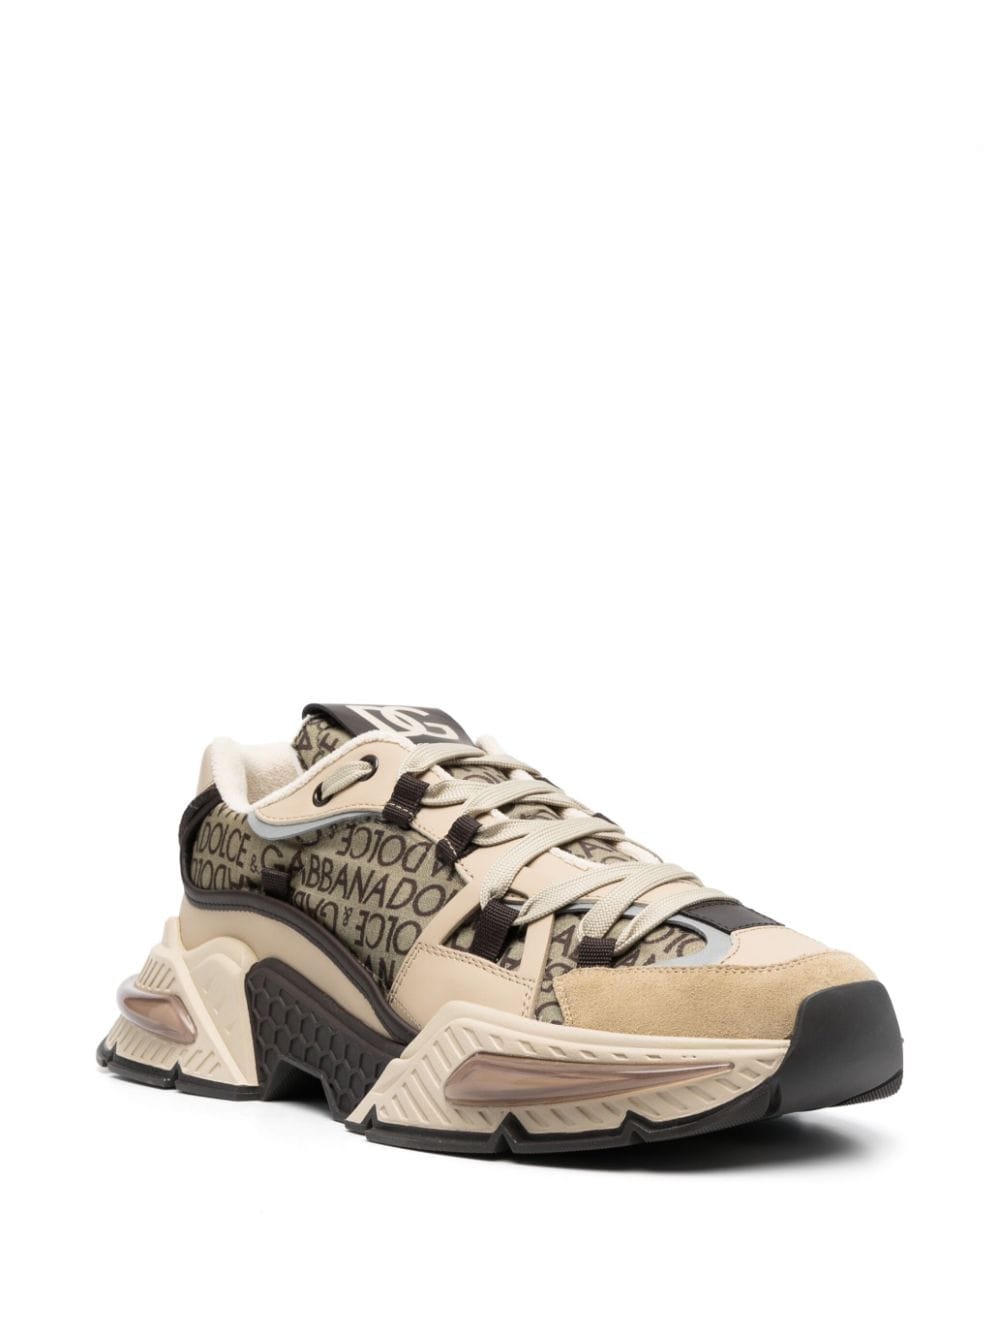 Dolce & Gabbana Nylon Airmaster Panelled low-top Sneakers - Farfetch